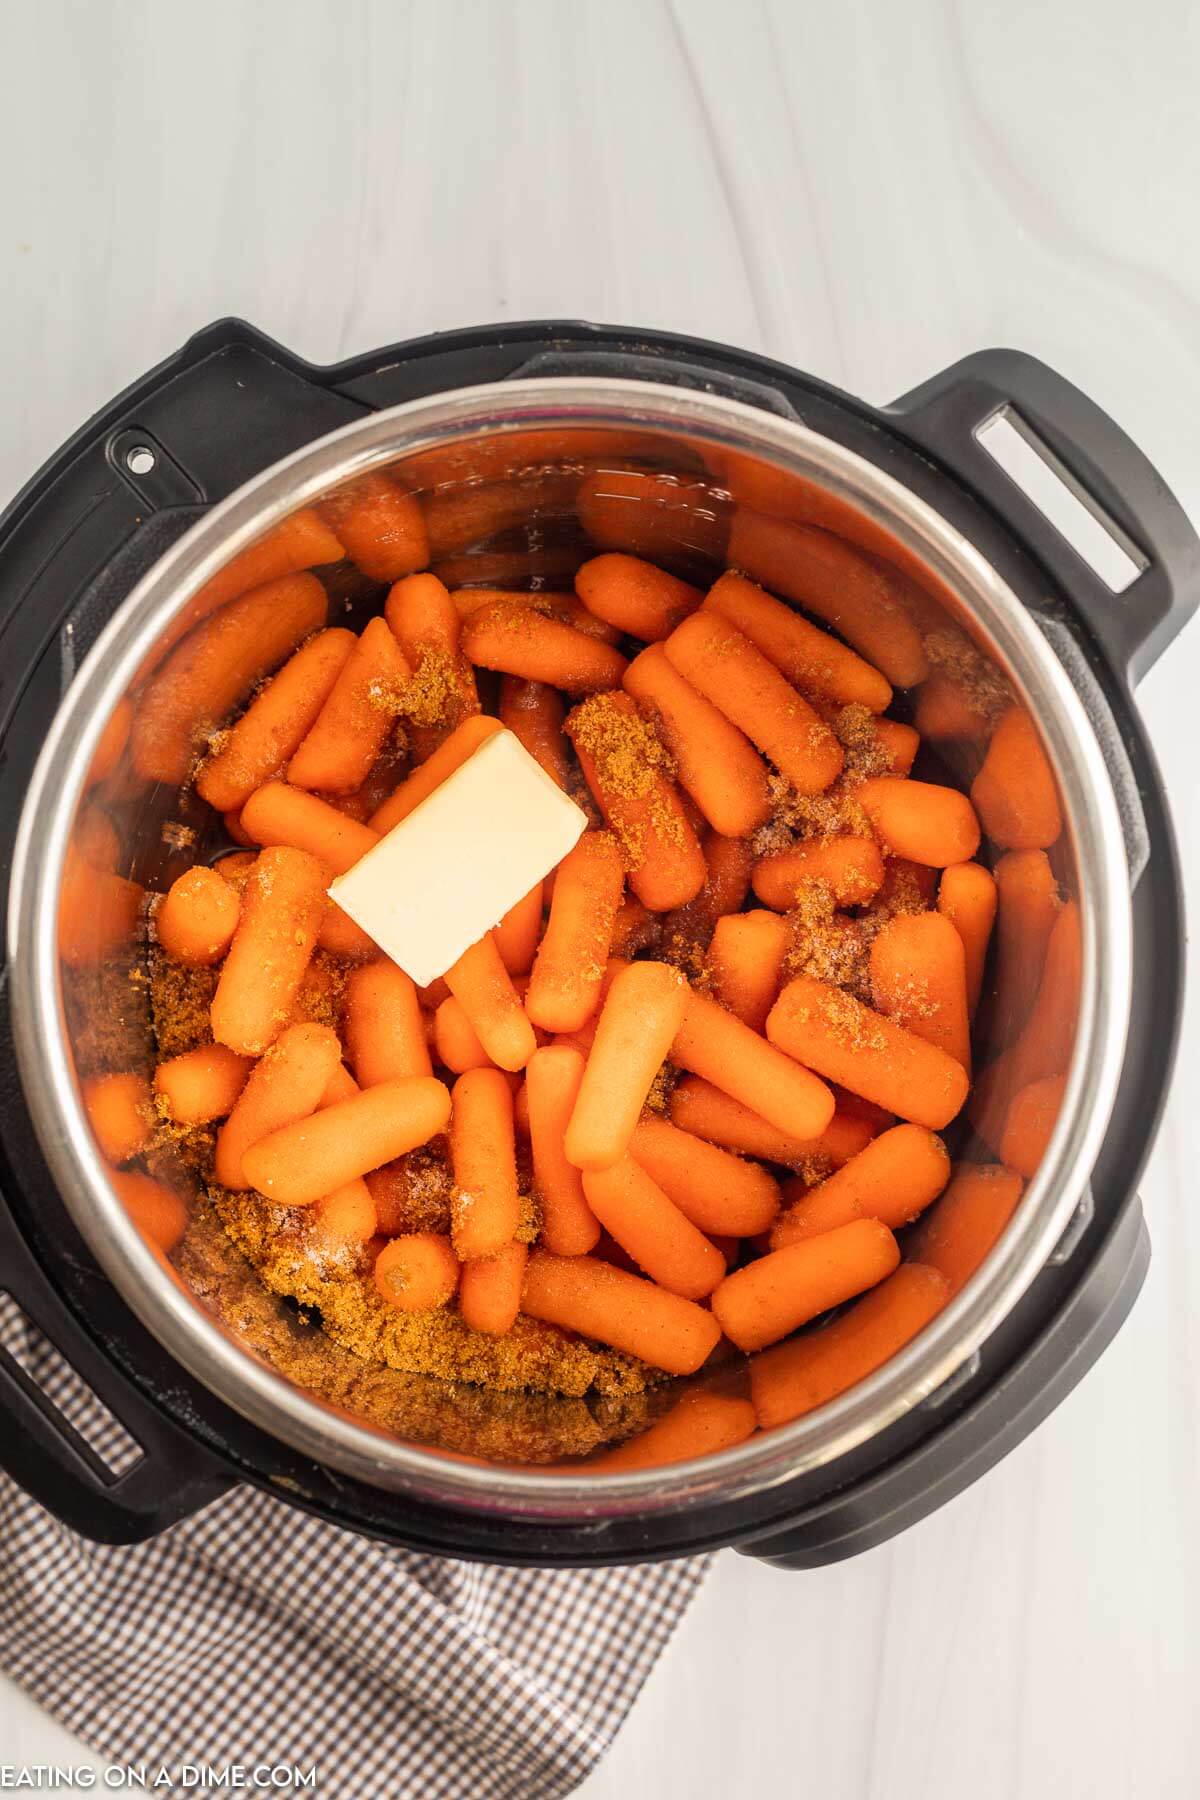 Placing the ingredients in the instant pot to cook 